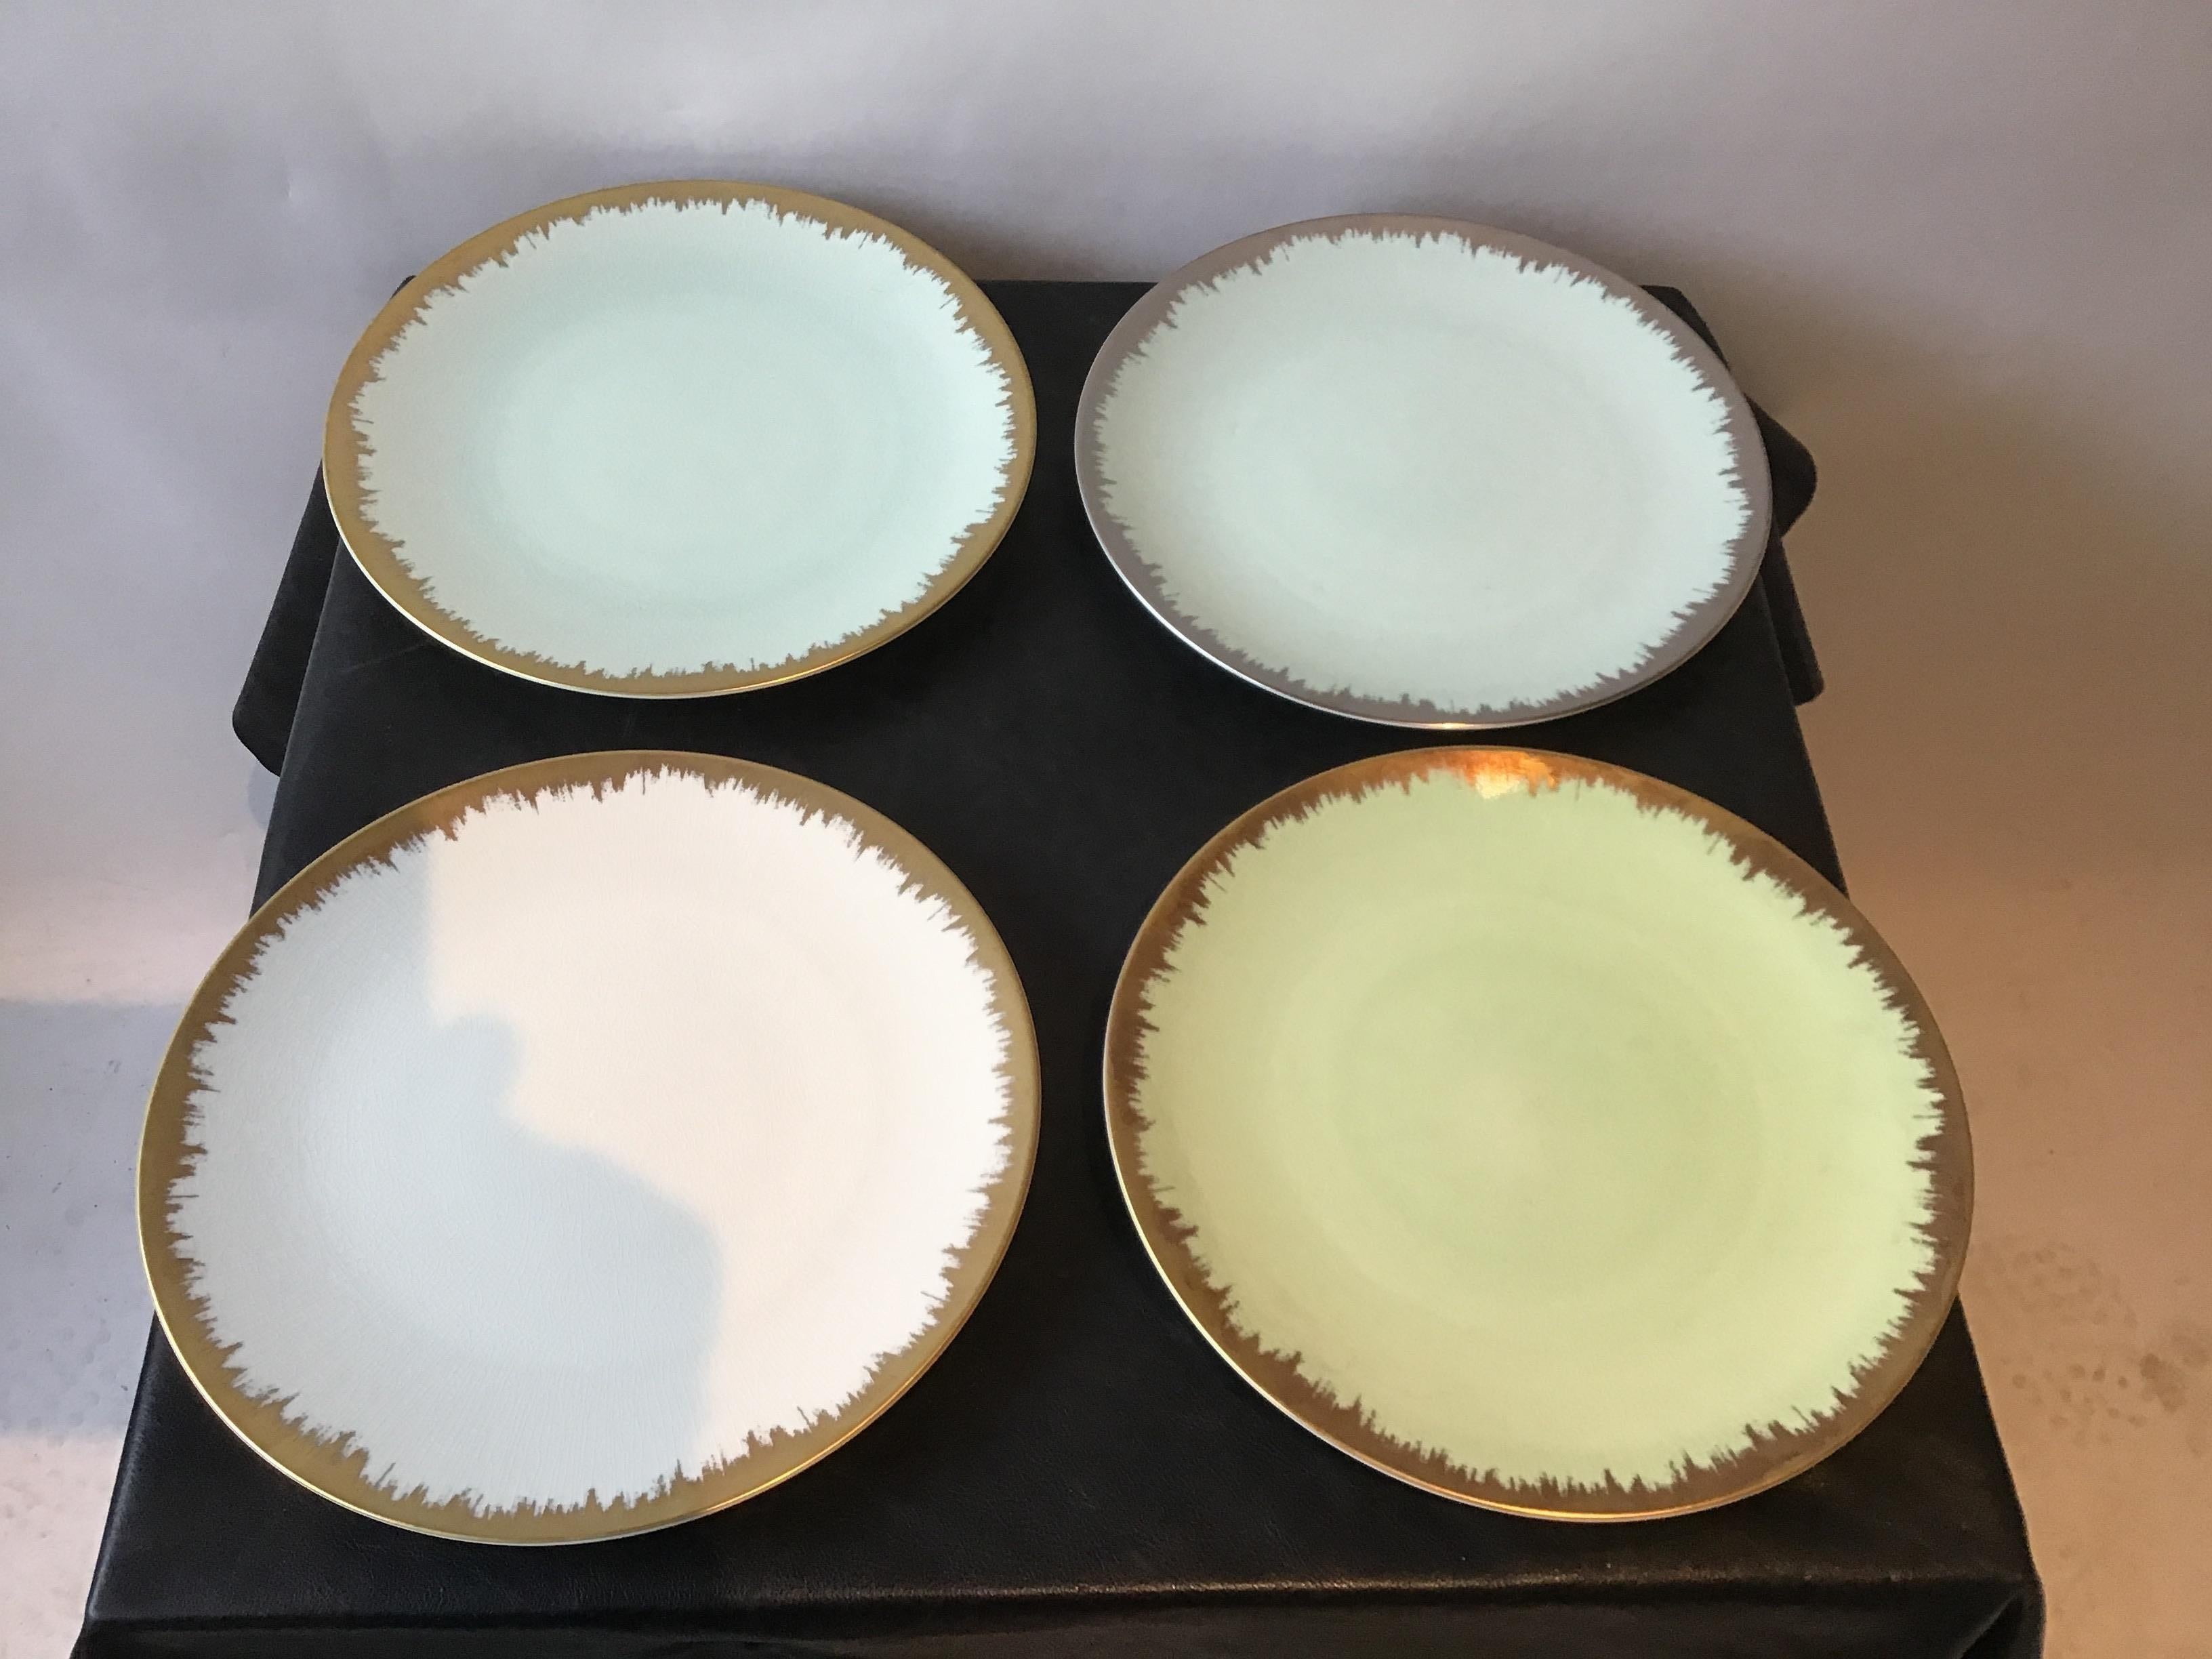 Kim Seybert Shakti dishes. Label still on dishes, never used. Hand crafted in Portugal.

Green with silver rim.
Chargers 29
Dinner plates 10
Bowls 45

White with gold rim.
Chargers 15

Powder Blue with silver rim.
Chargers 2
Dinner